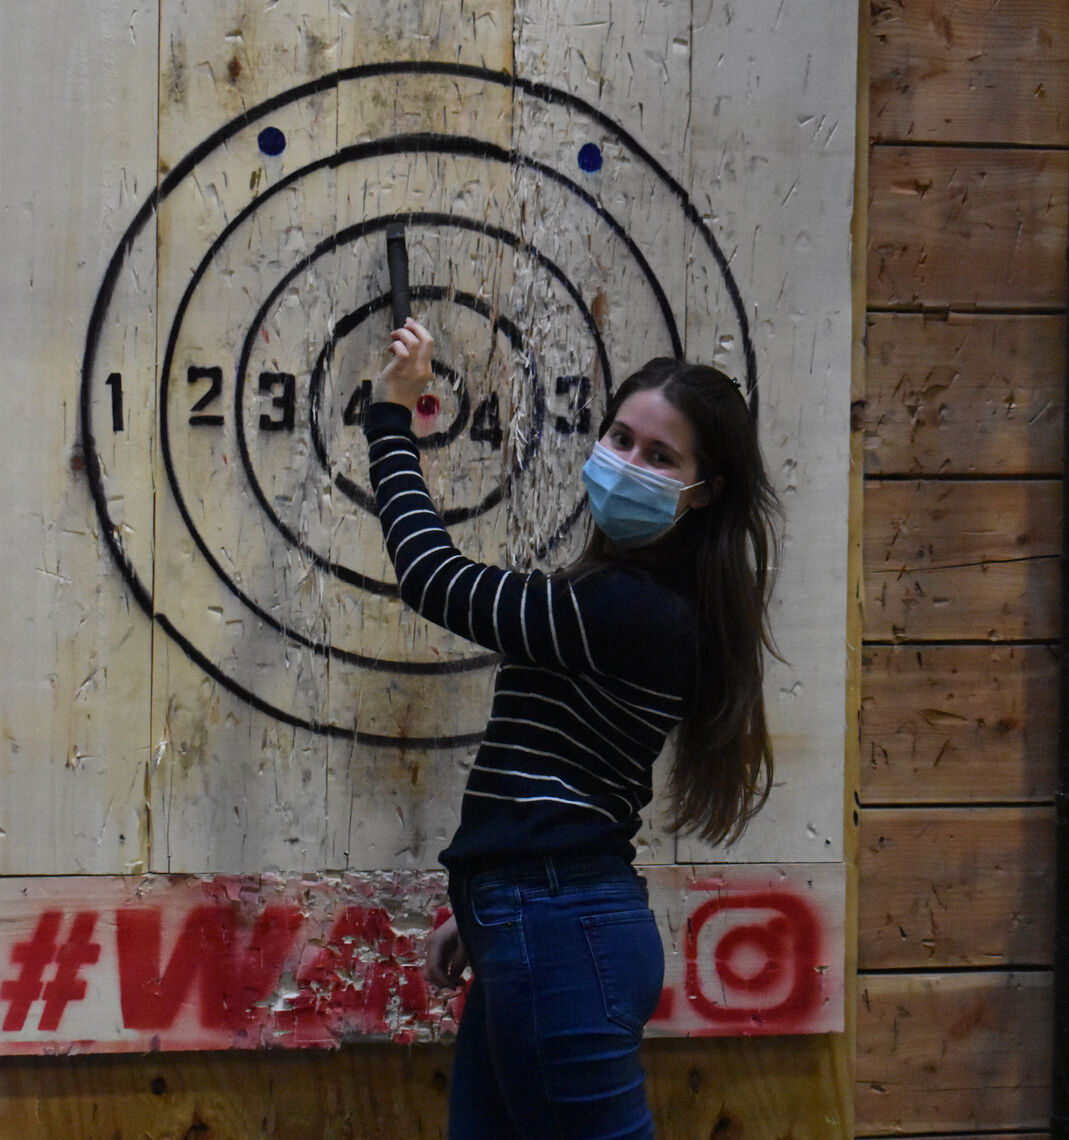 Elise Adams was an axe-throwing champ at GWWO’s annual holiday celebration.